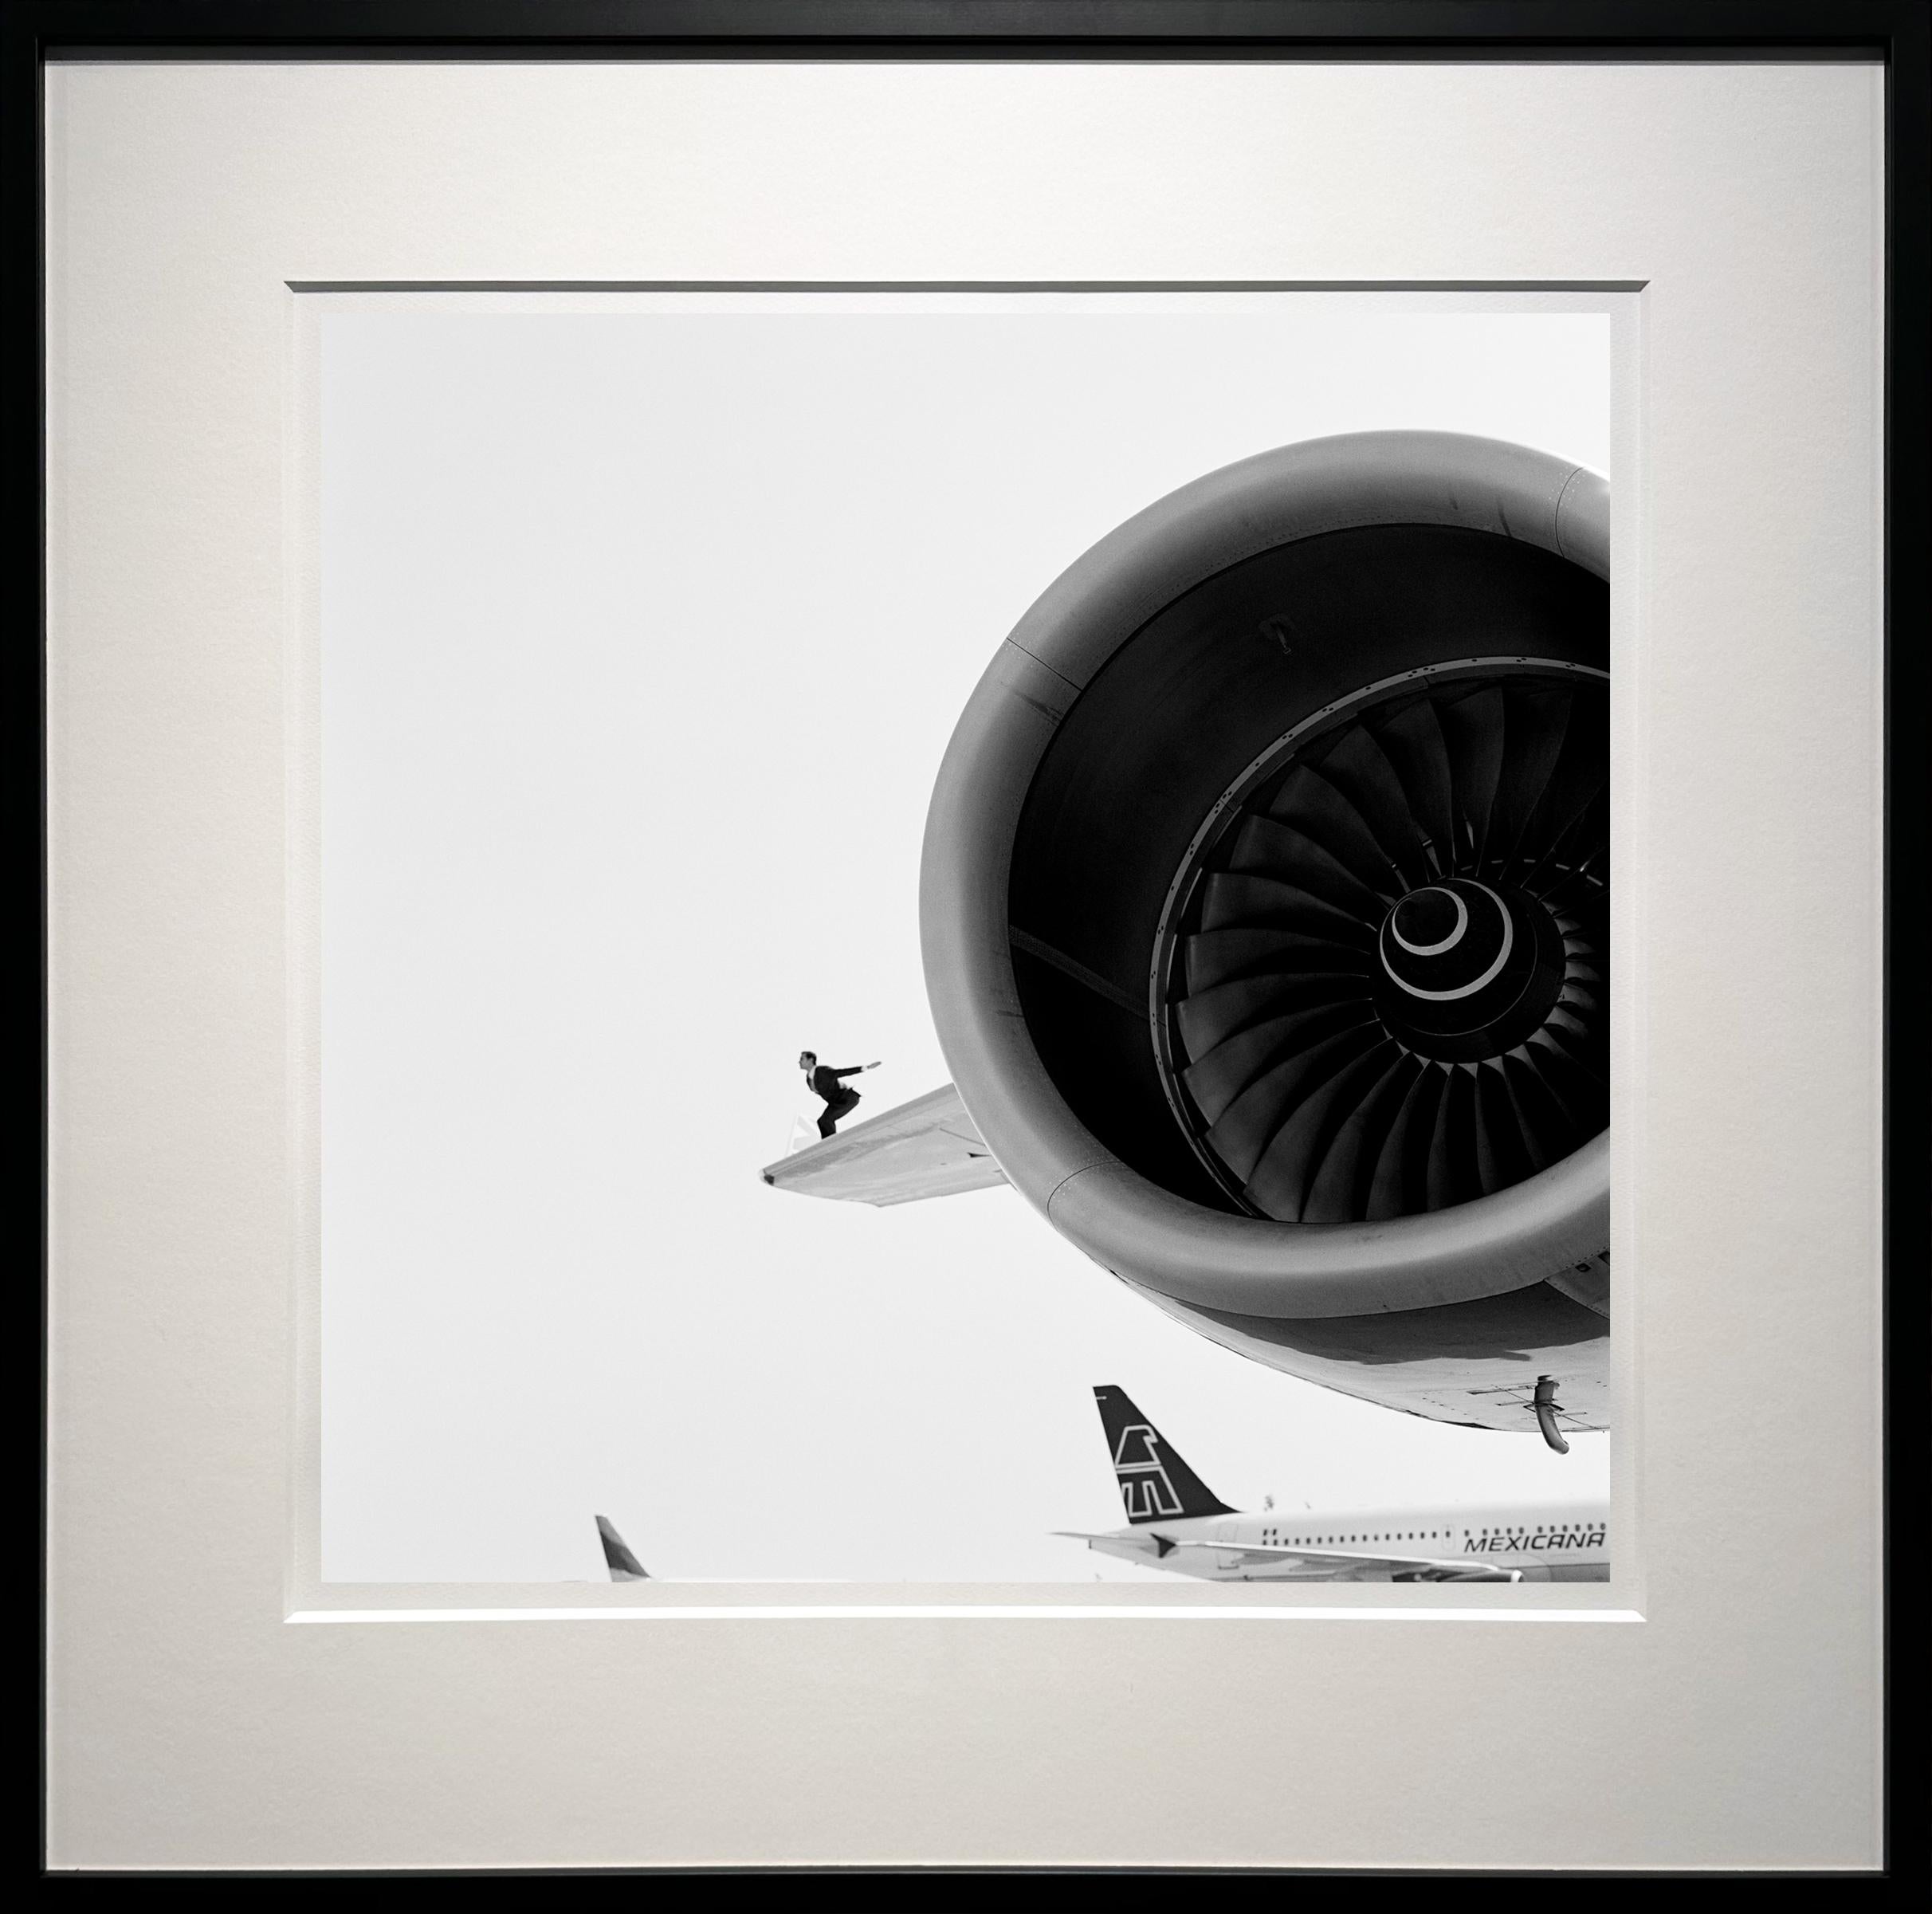 Reed perched on airplane wing, JFK, New York - 20 x 20 inches - Photograph by Rodney Smith